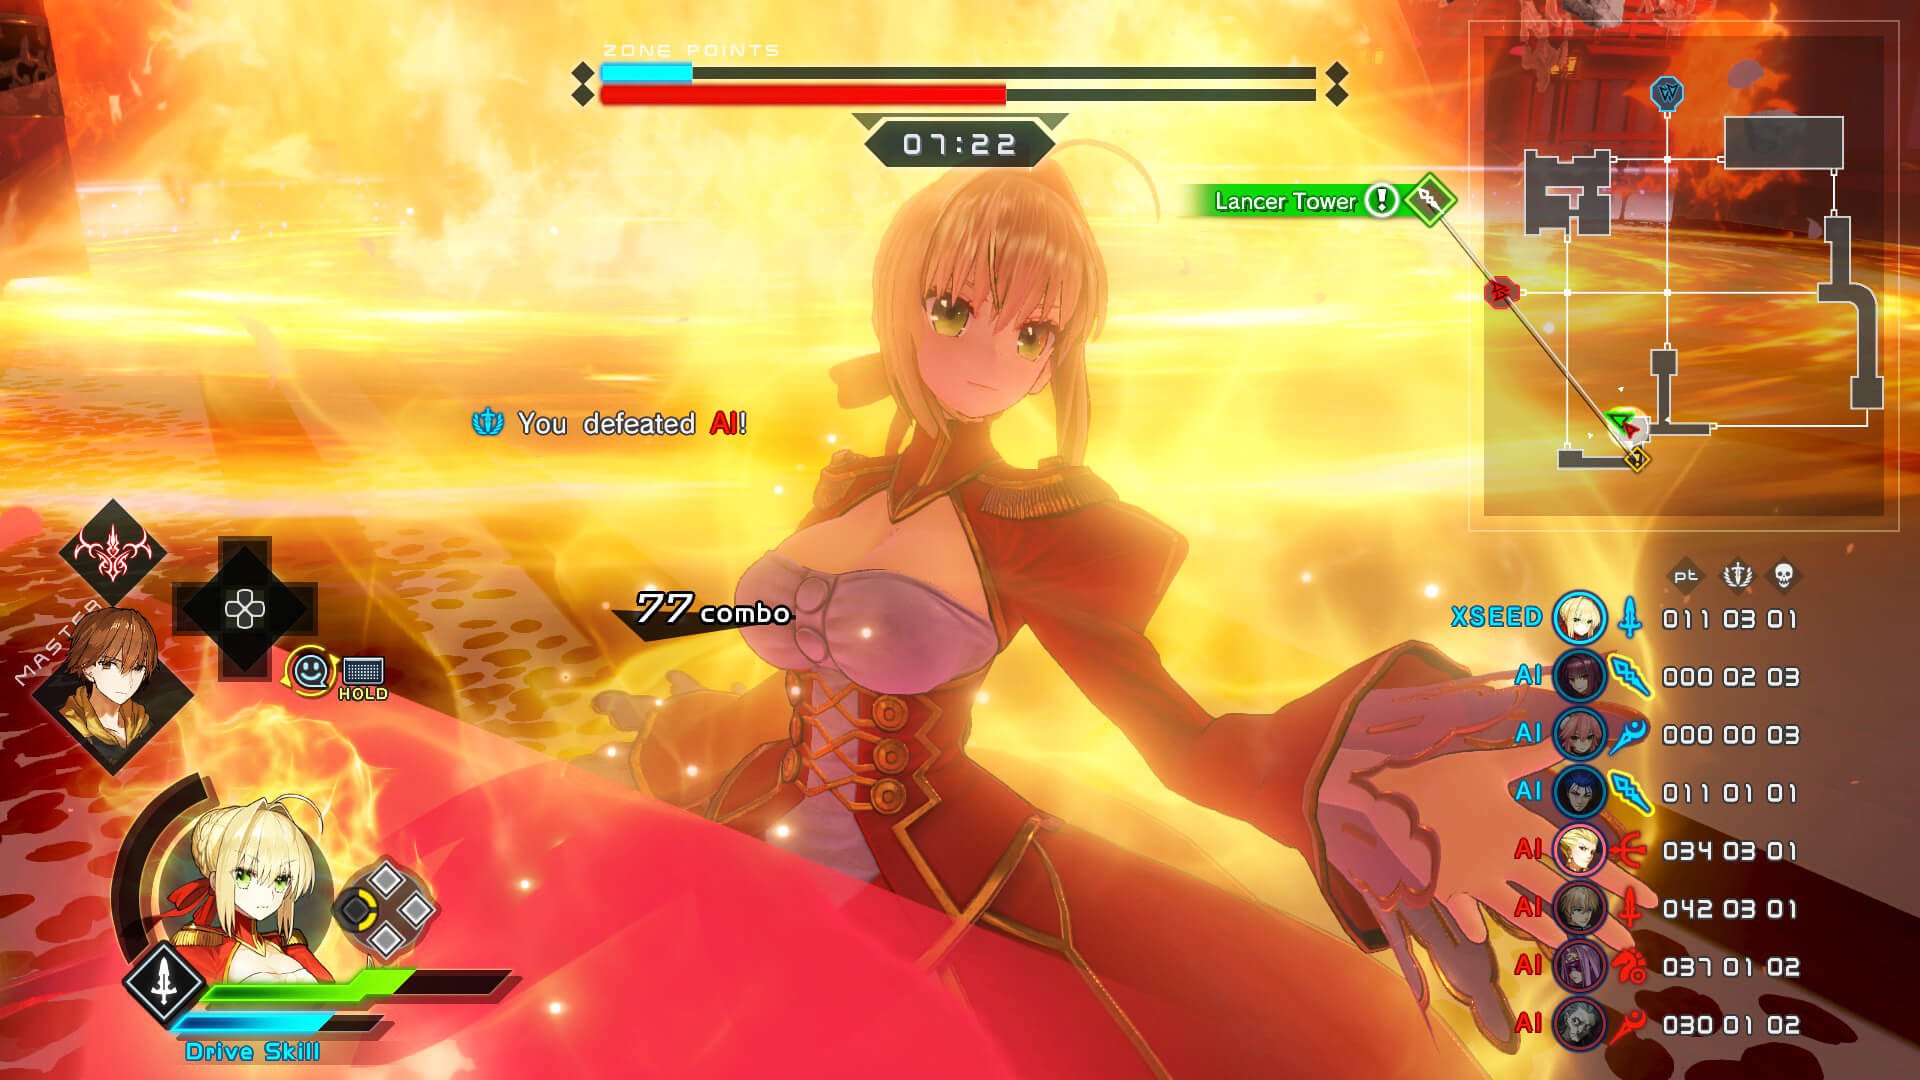 Fate/Extella Link, a Fate game developed by Marvelous